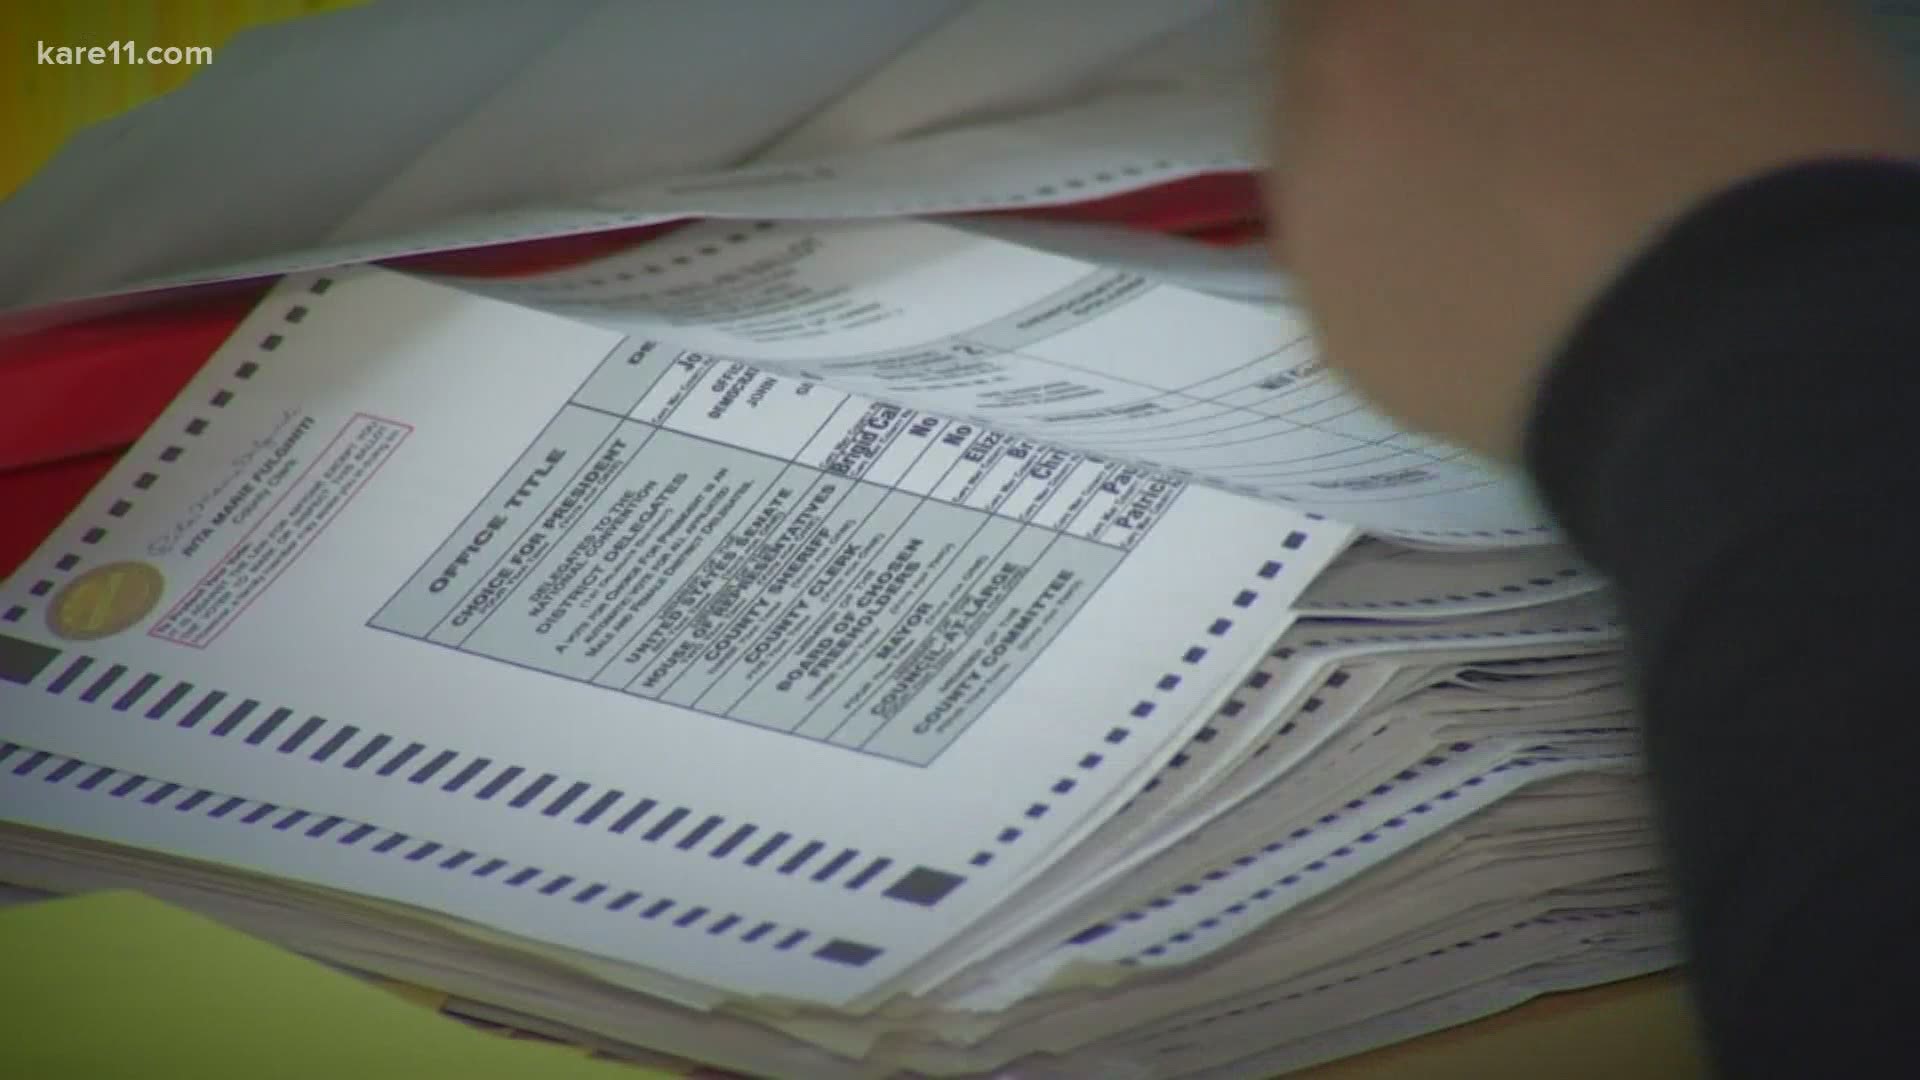 A brief legal ruling allowed unlimited ballot harvesting for nearly 40 days this summer as lawsuit continues.